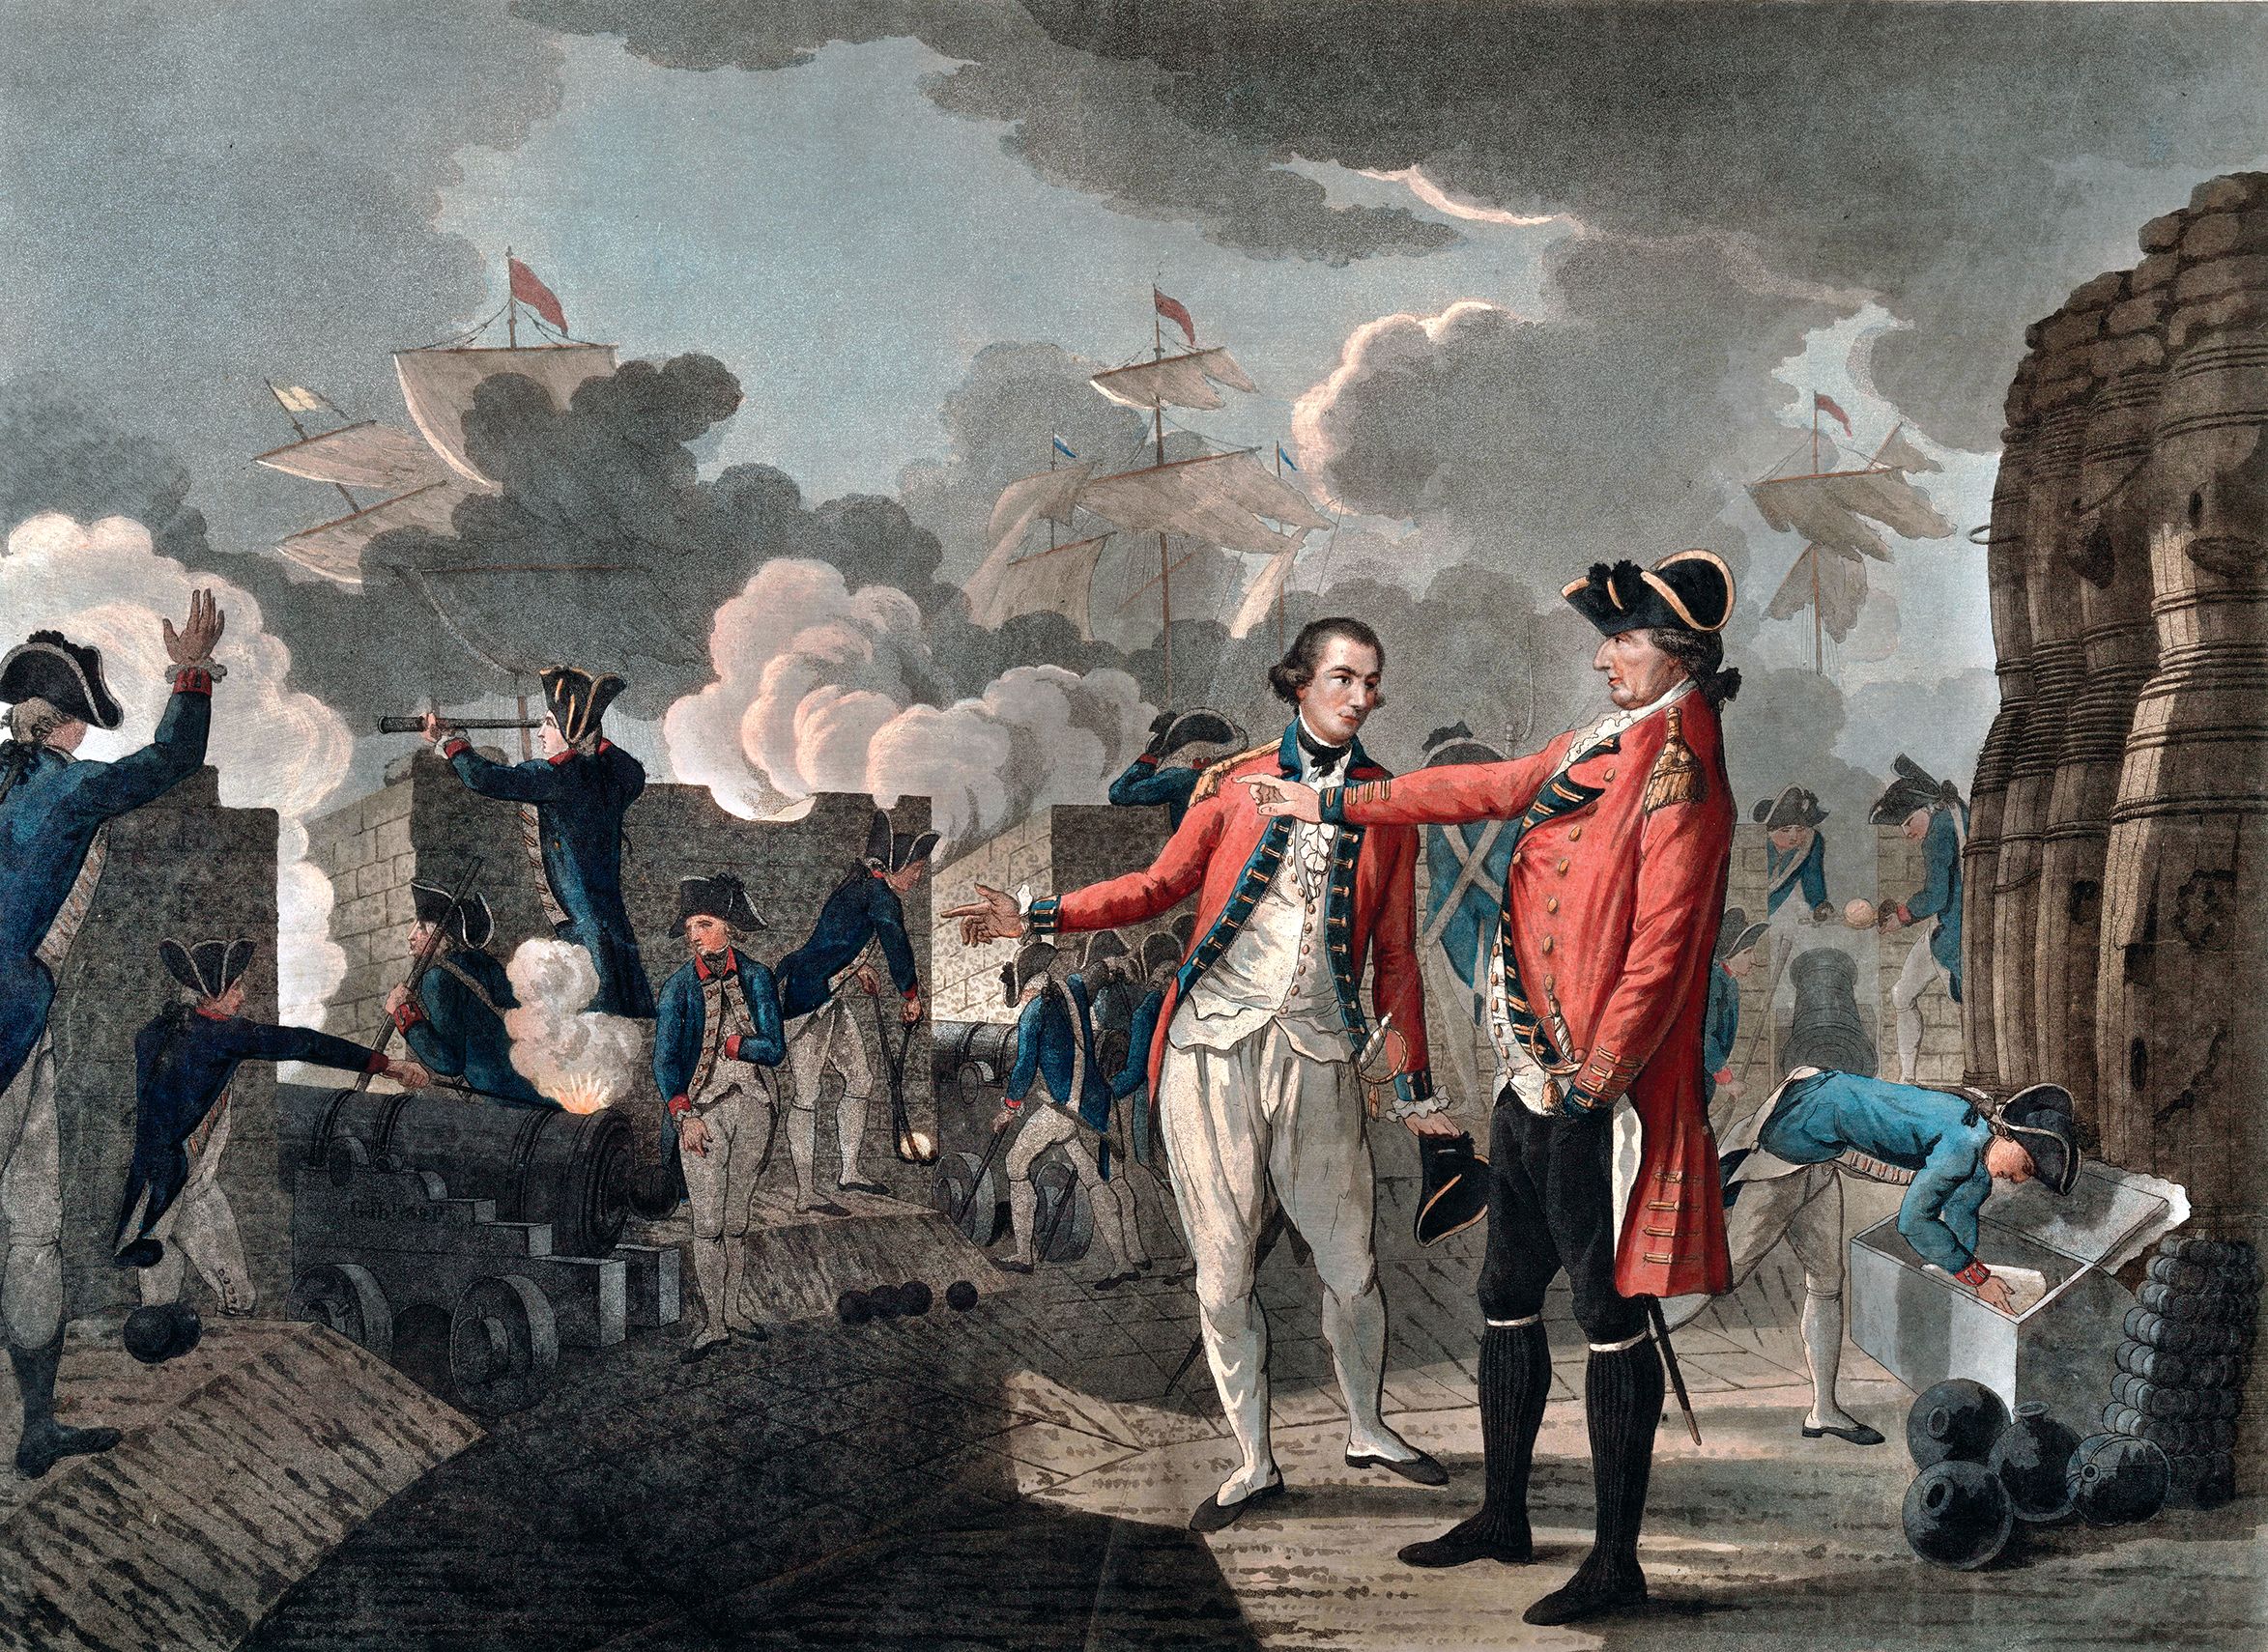 Lt. Gen. George Elliot and an unidentified officer observe Royal Artillery batteries firing on Spanish ships in the harbor. The first artillery exchange occurred in September 1779. “Every battery and angle bellowed with rage, and foamed with destruction,” wrote an observer.